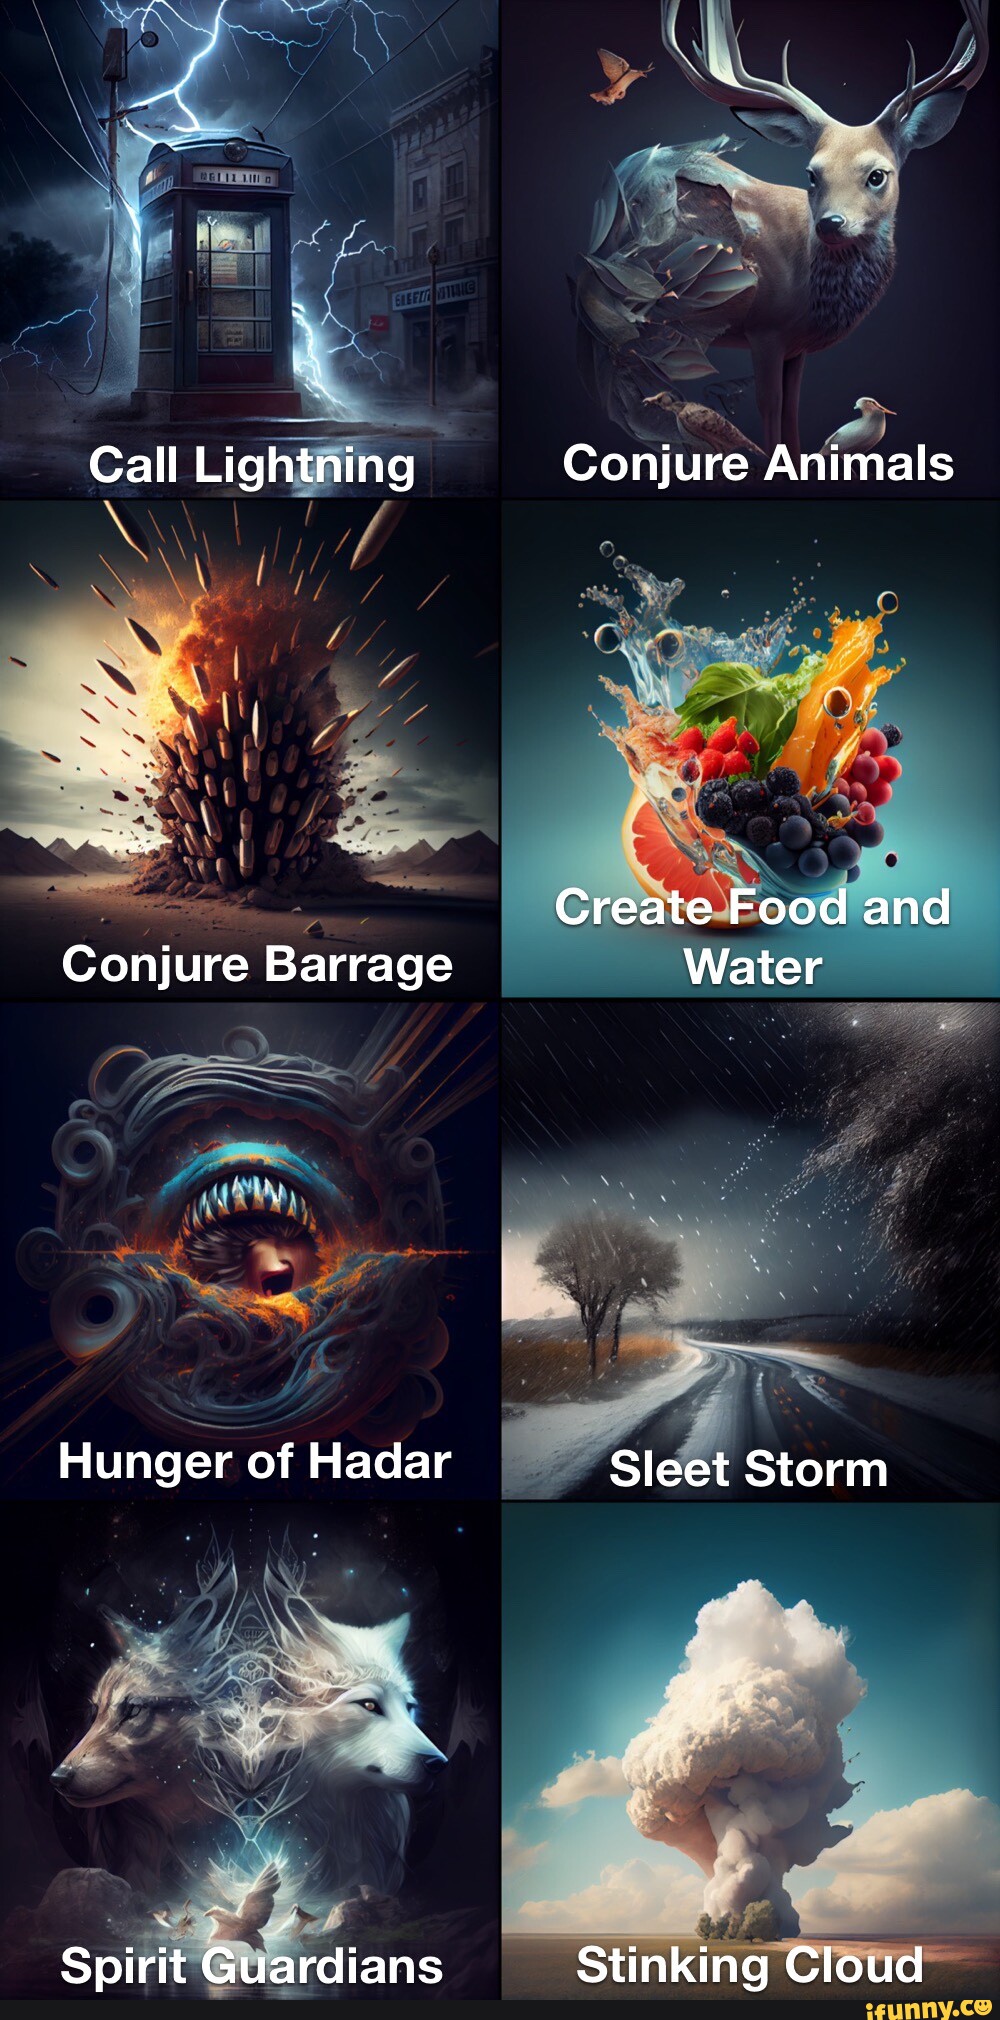 Call Lightning Conjure Barrage Hunger of Hadar Spirit Guardians Conjure  Animals Create Food and Water Sleet Storm Stinking Cloud - iFunny